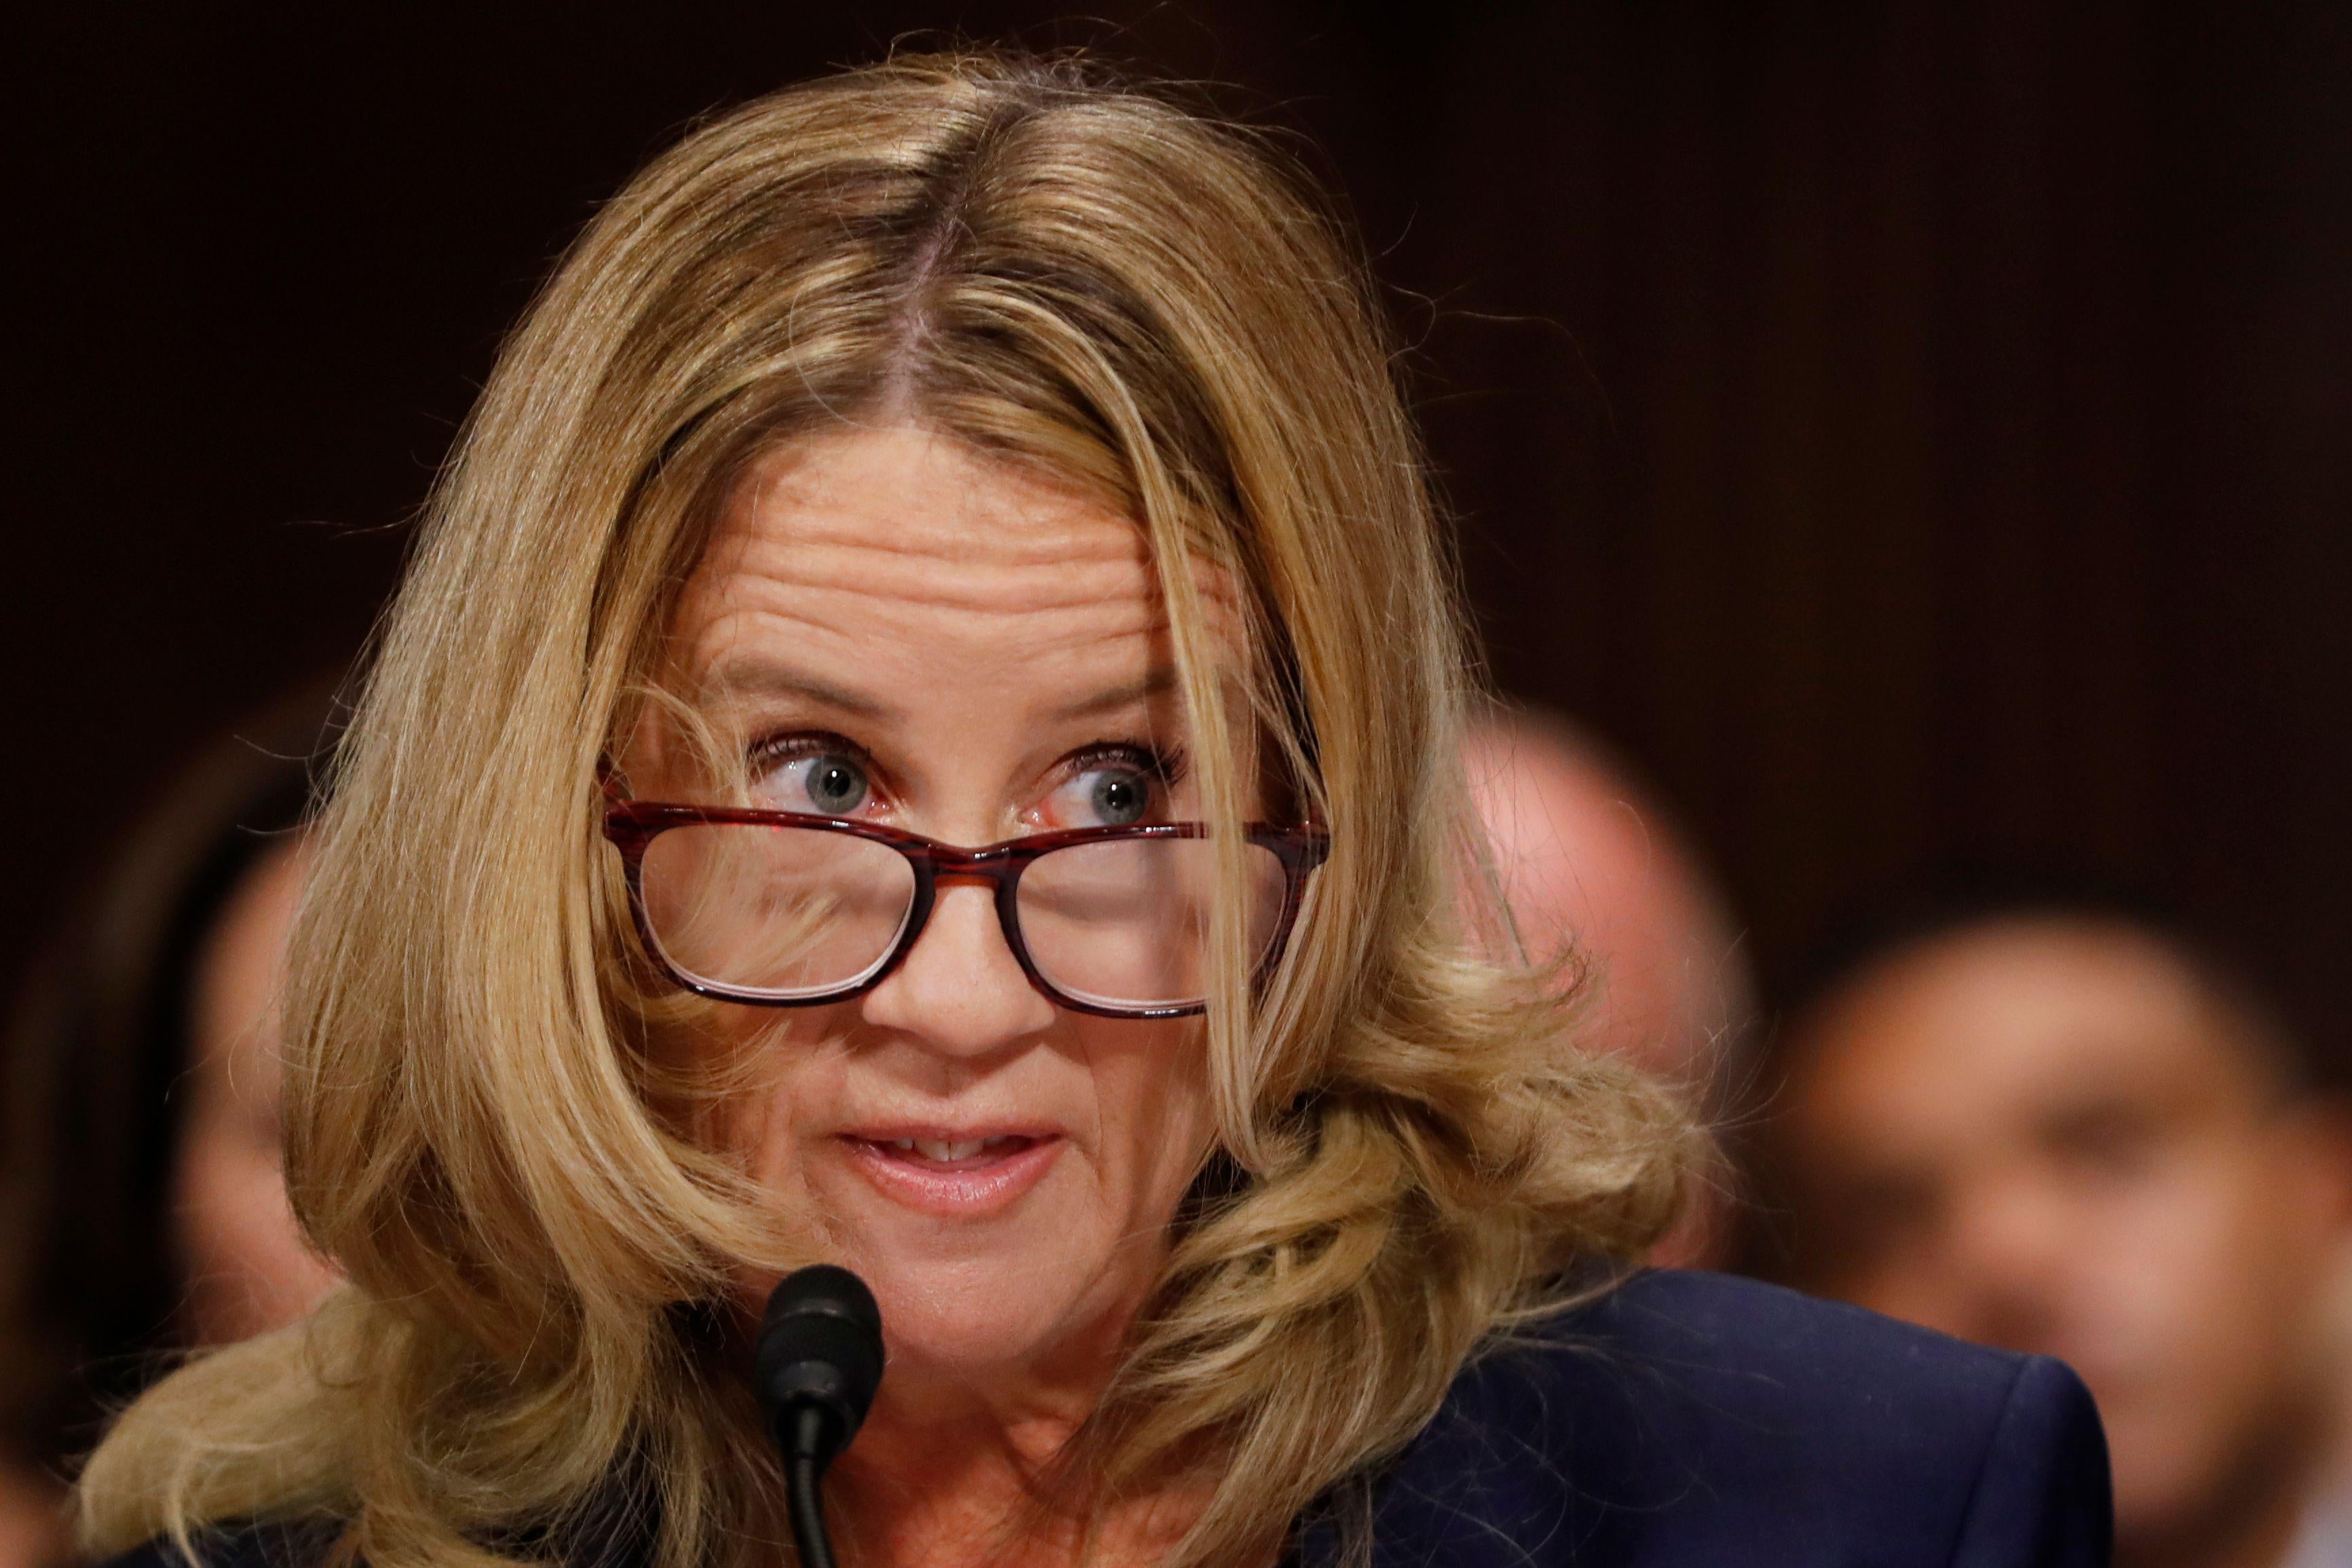 Christine Blasey Ford during her testimony at the Senate Judiciary Committee.